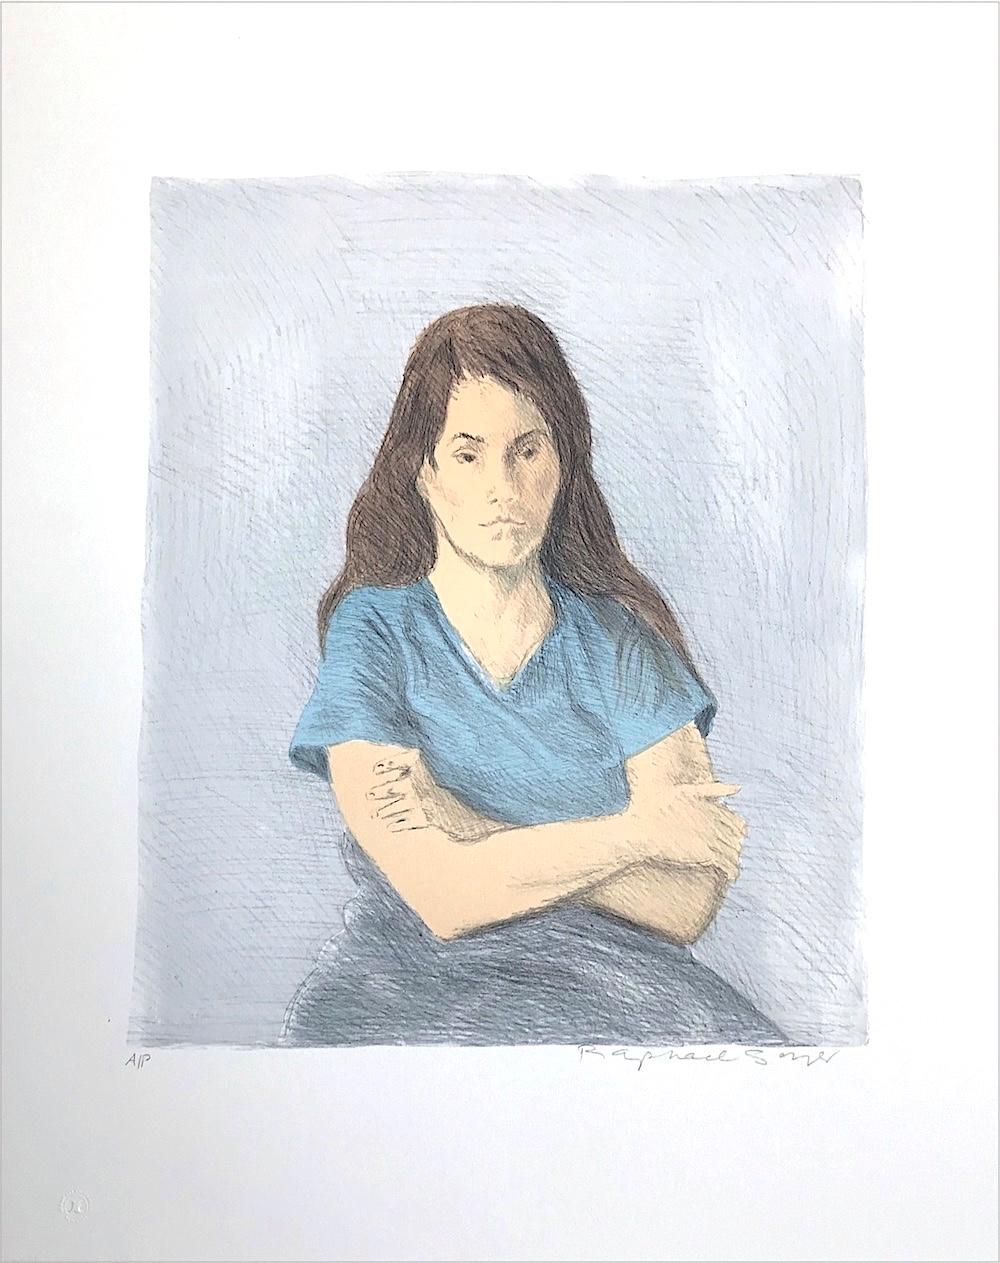 SEATED WOMAN ARMS CROSSED Signed Lithograph, Young Woman Arms Crossed, Blue Tee - Print by Raphael Soyer